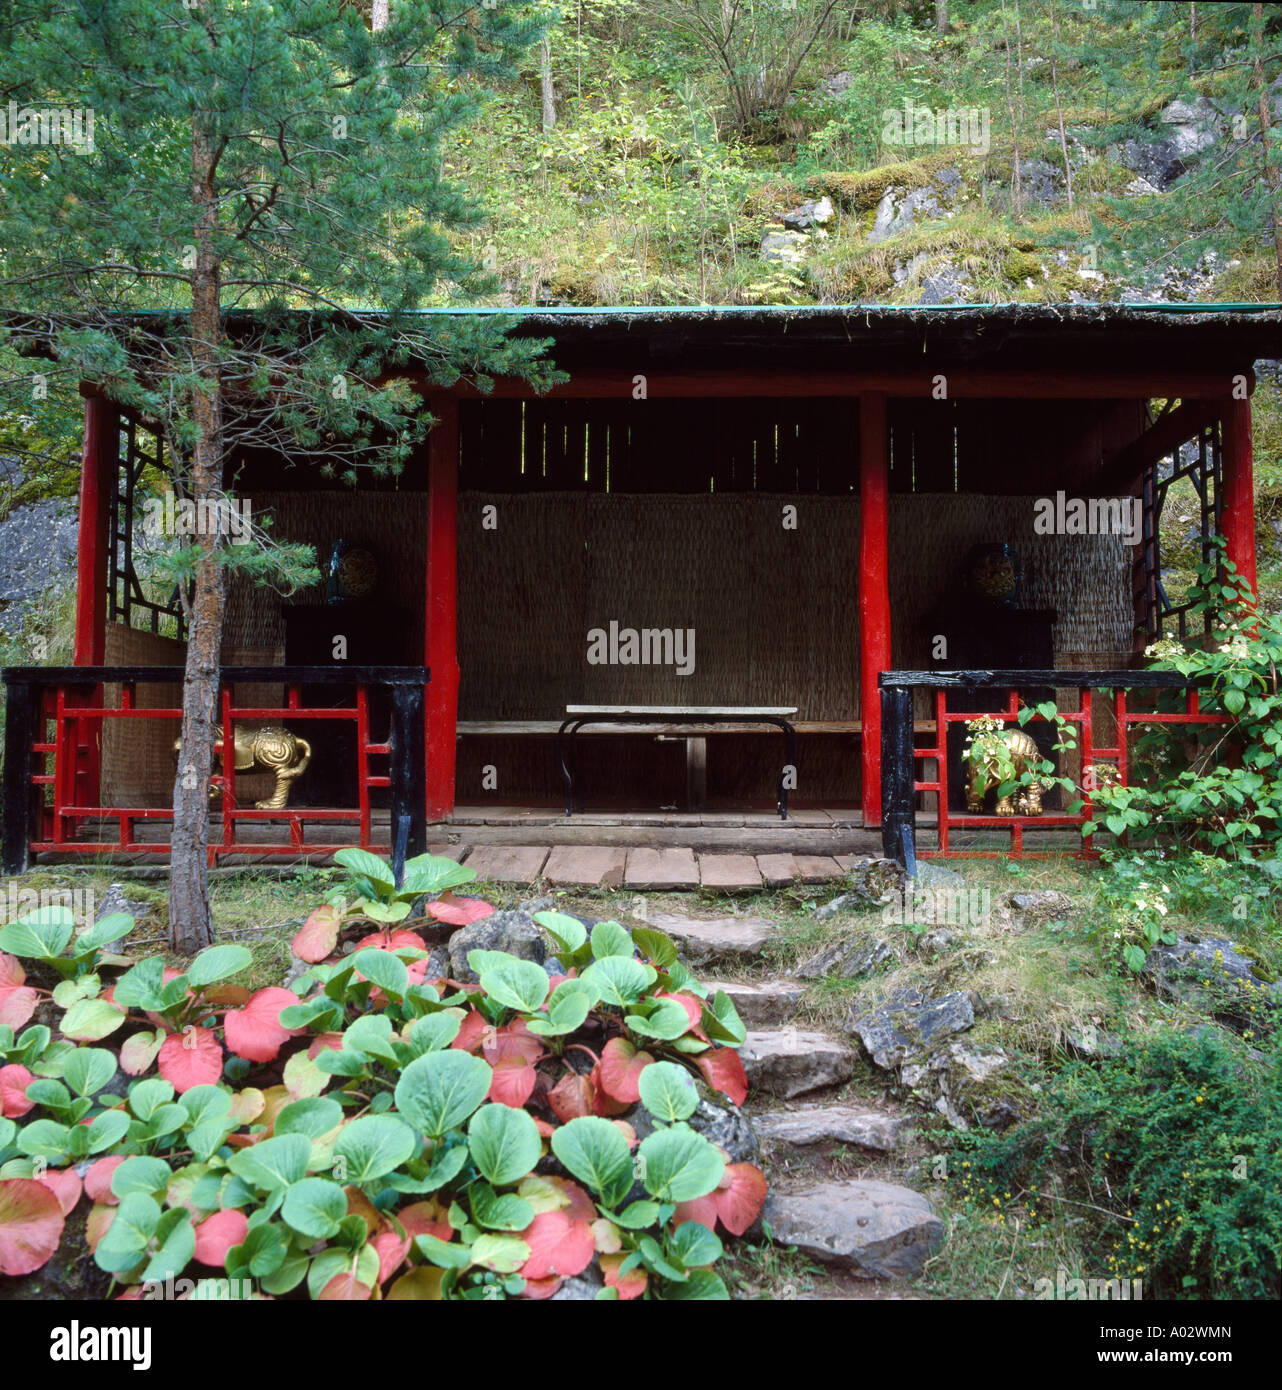 Oriental summerhouse with red paintwork and underplanted bergenias in country hillside garden Stock Photo